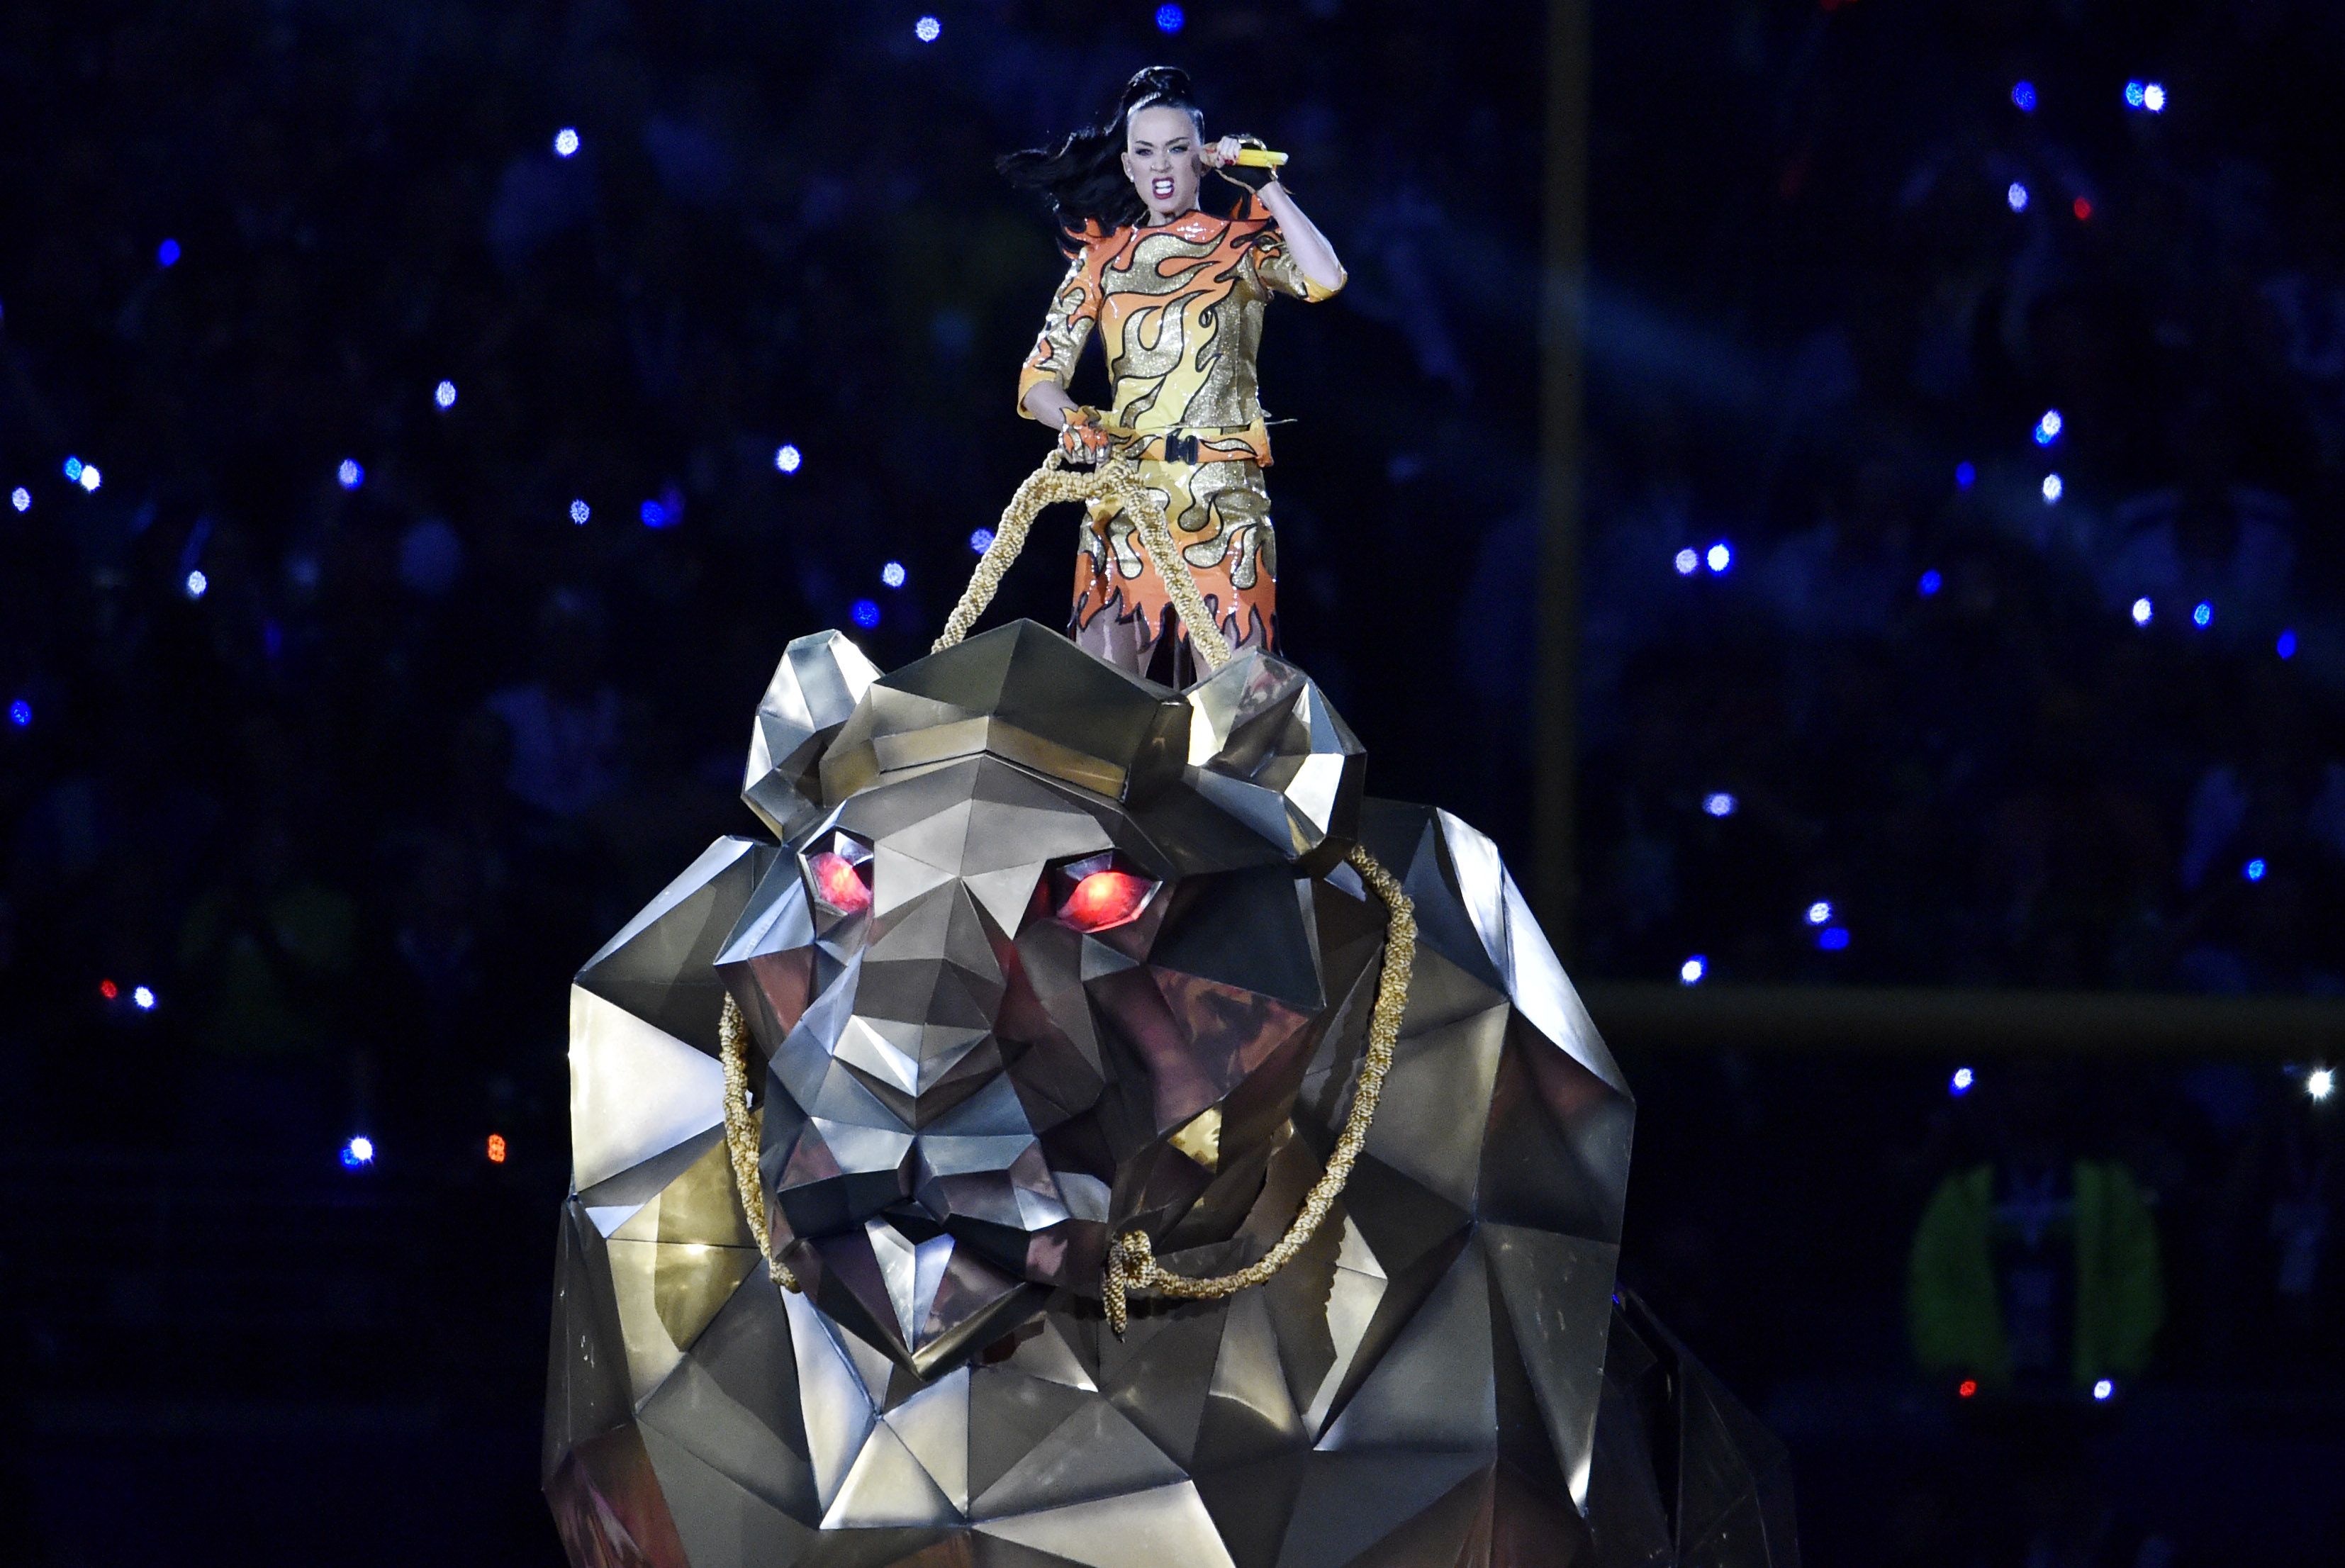 Katy Perry blew away the Super Bowl halftime show